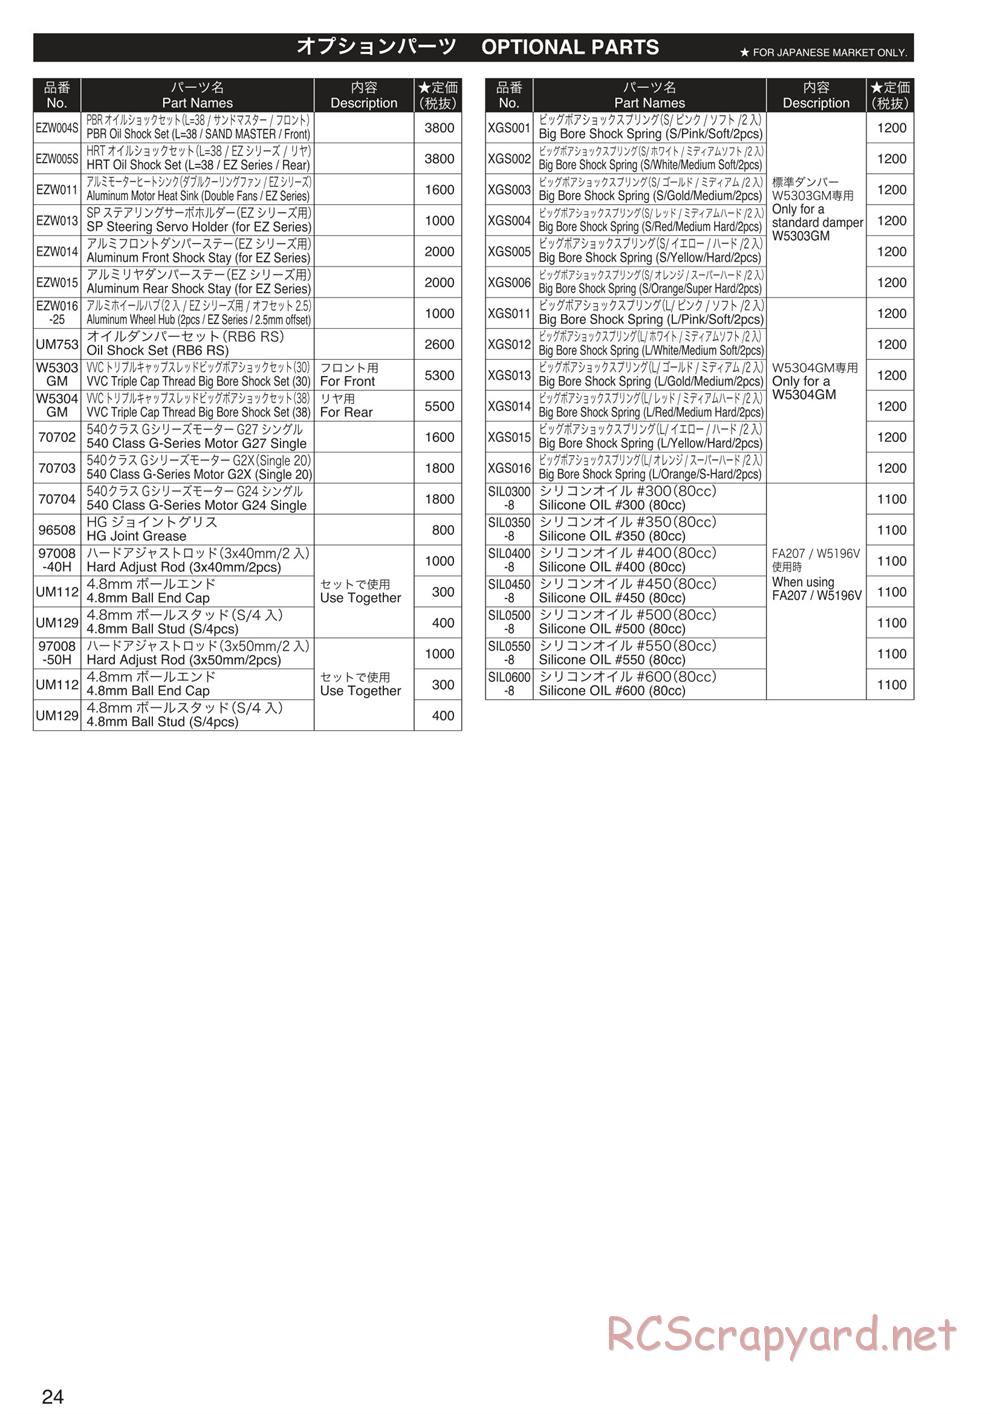 Kyosho - Monster Tracker EP - Parts List - Page 2